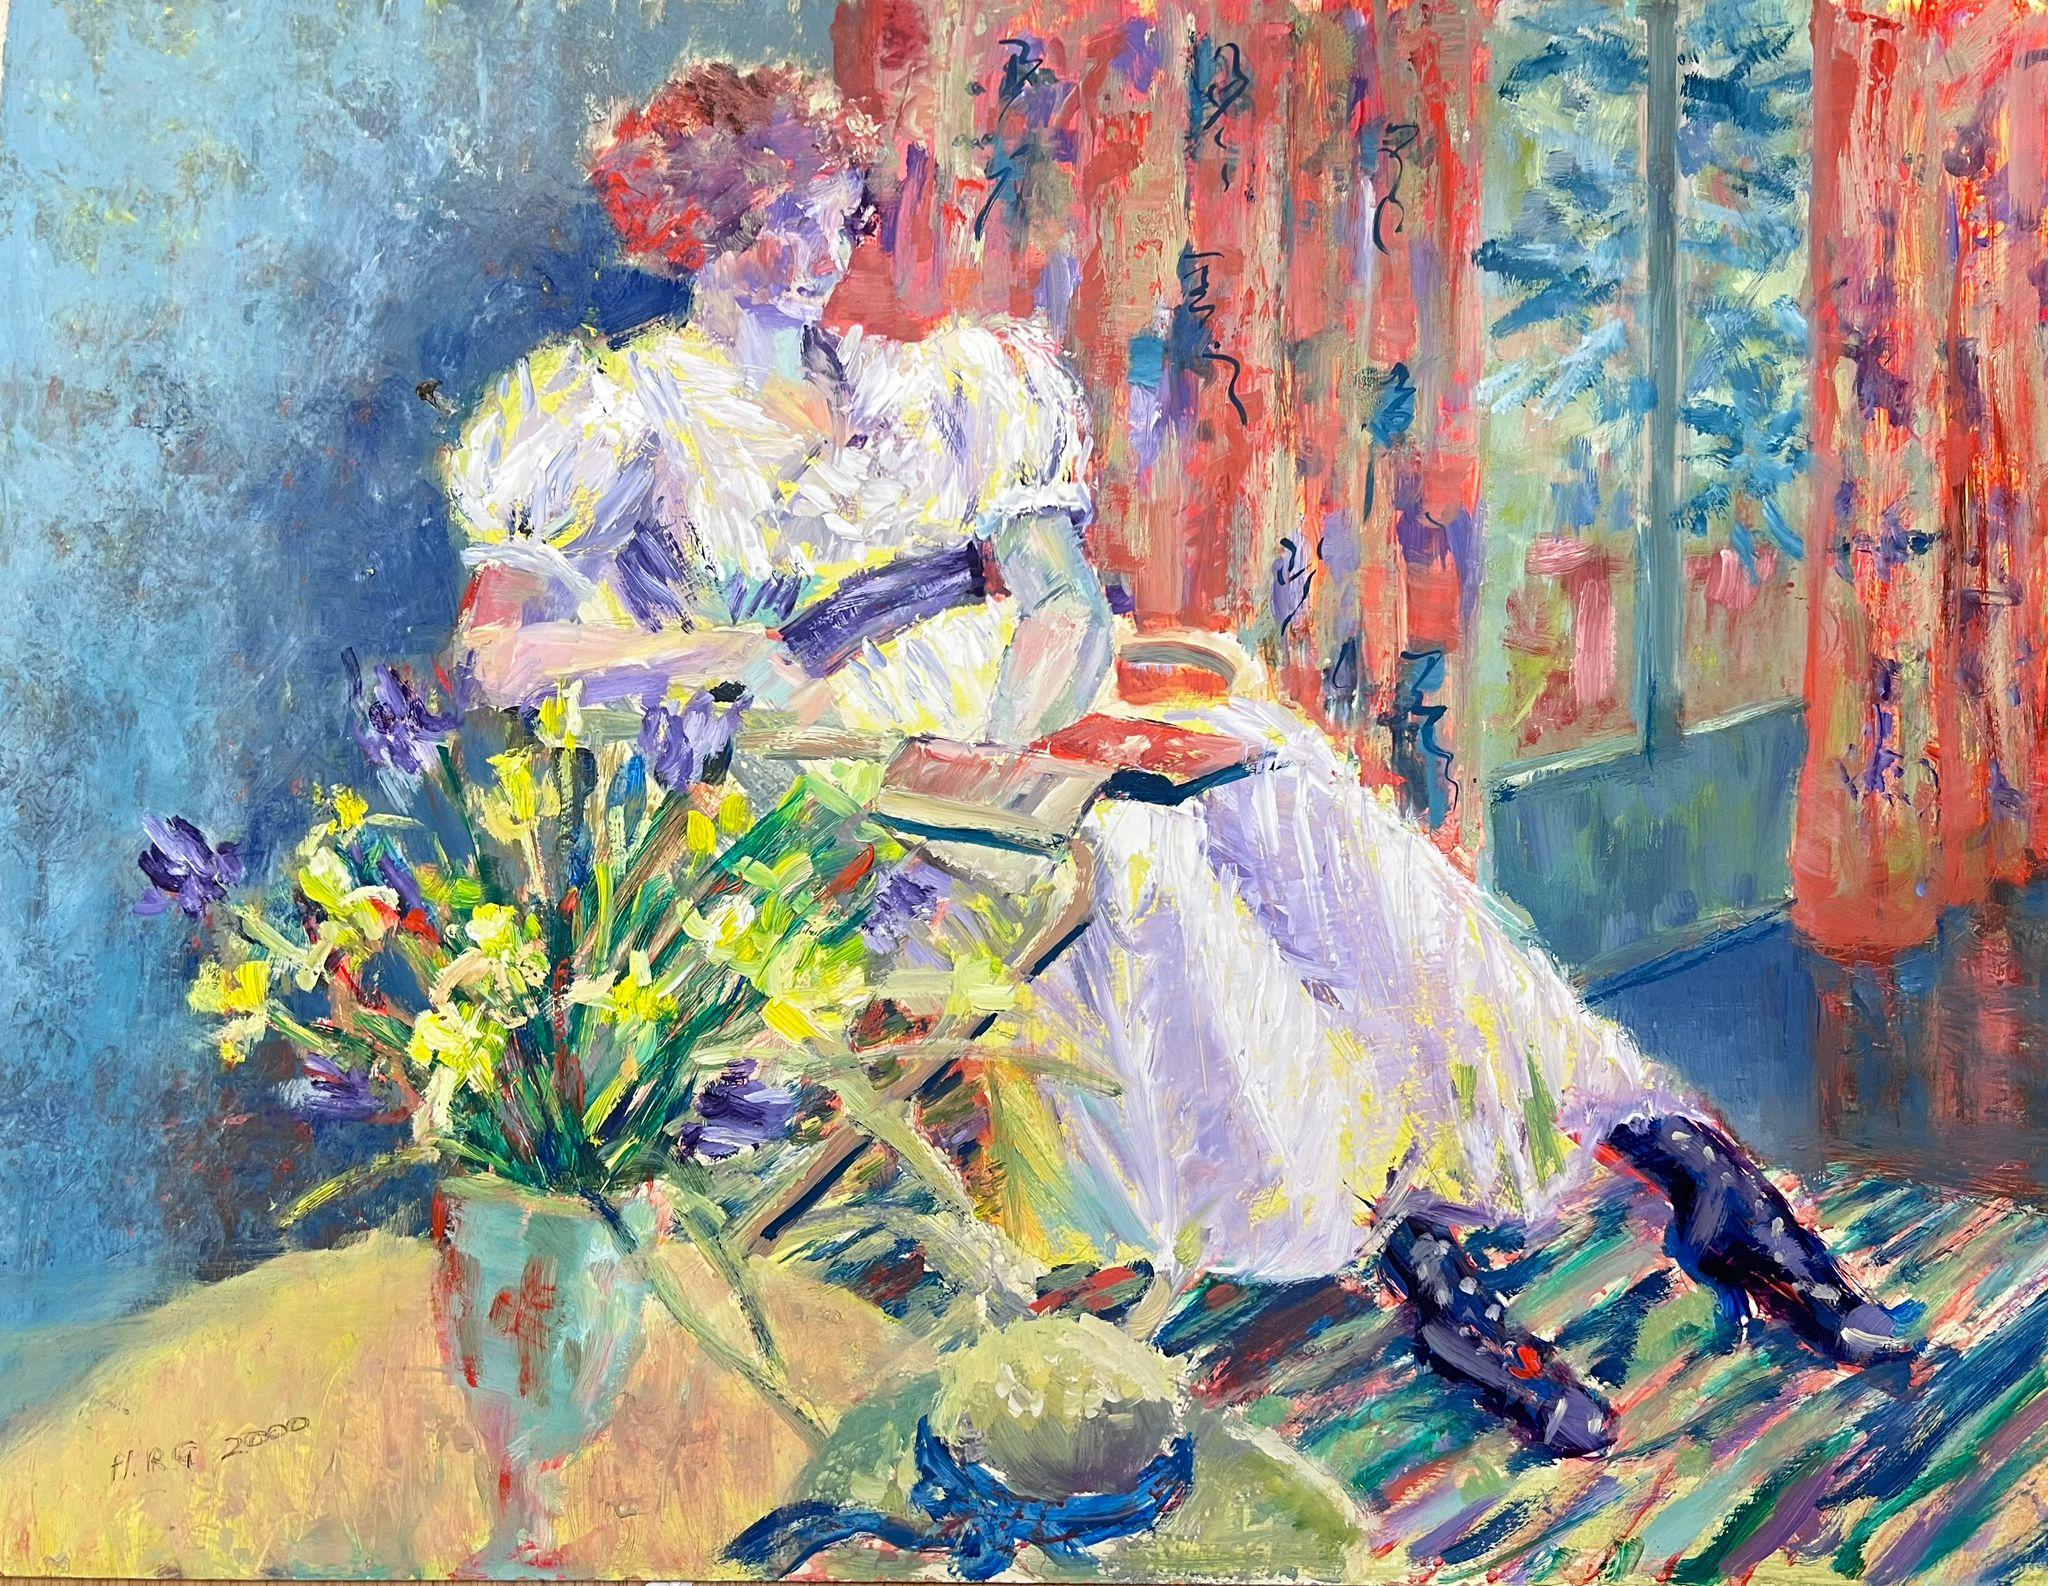 Lady Reading
by Helen Greenfield (British 20th century) 
signed initials oil painting on board, unframed
dated 2000
board: 17.75 x 23 inches
condition: overall very good
provenance: all the paintings we have by this artist have come from their